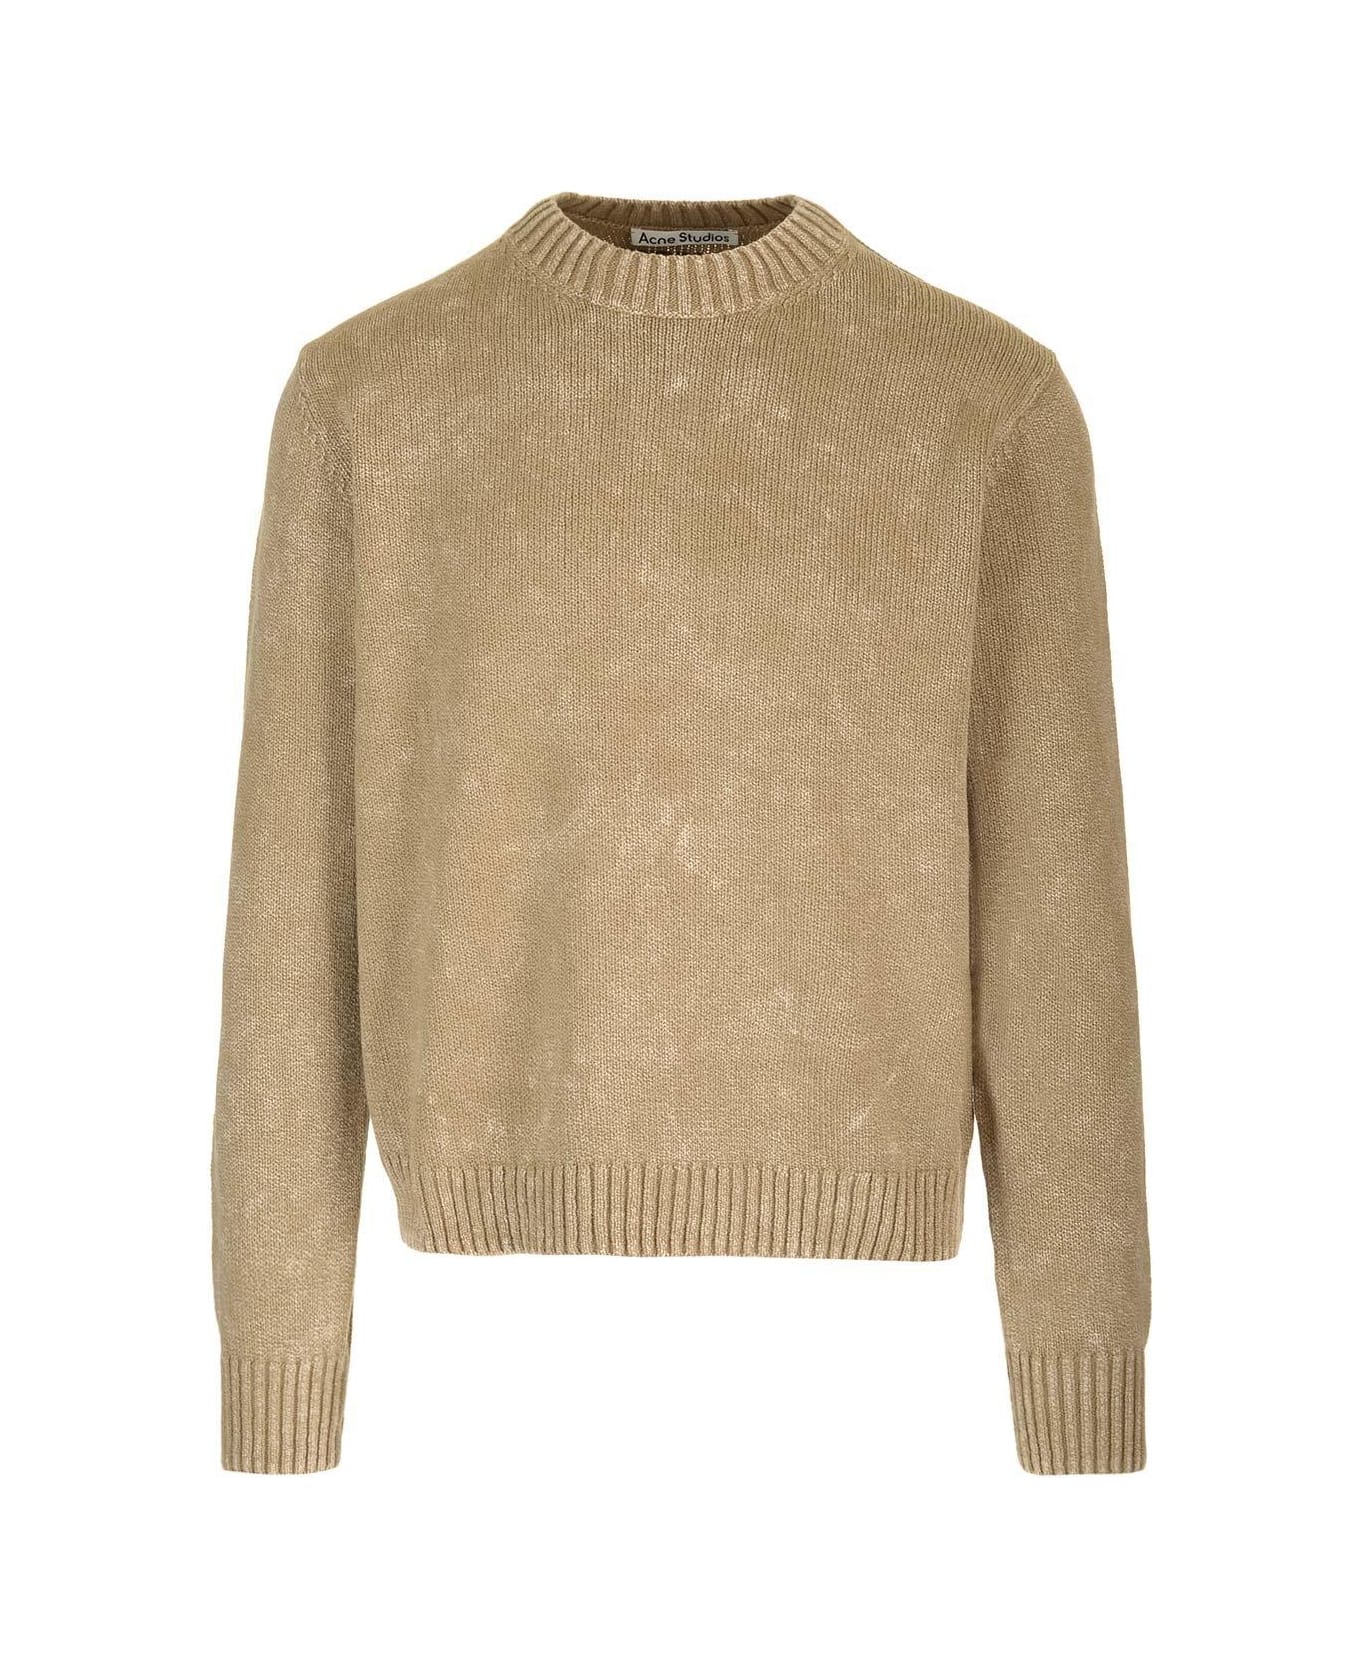 Acne Studios Round Neck Knitted Sweater - Green